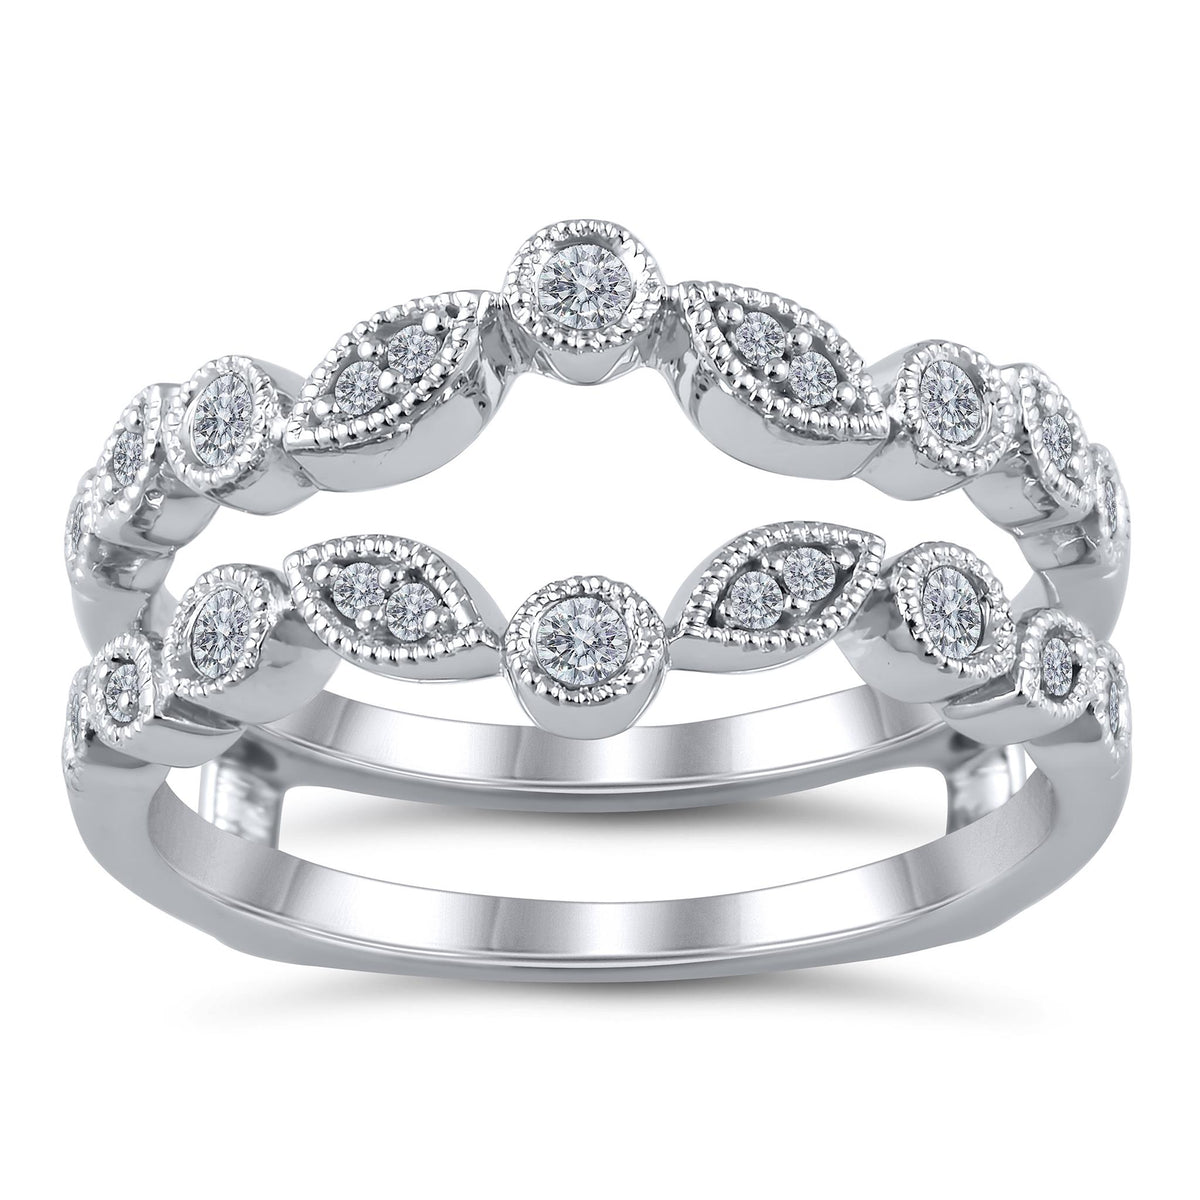 Insert Guard Ring With 0.25cttw Natural Diamonds